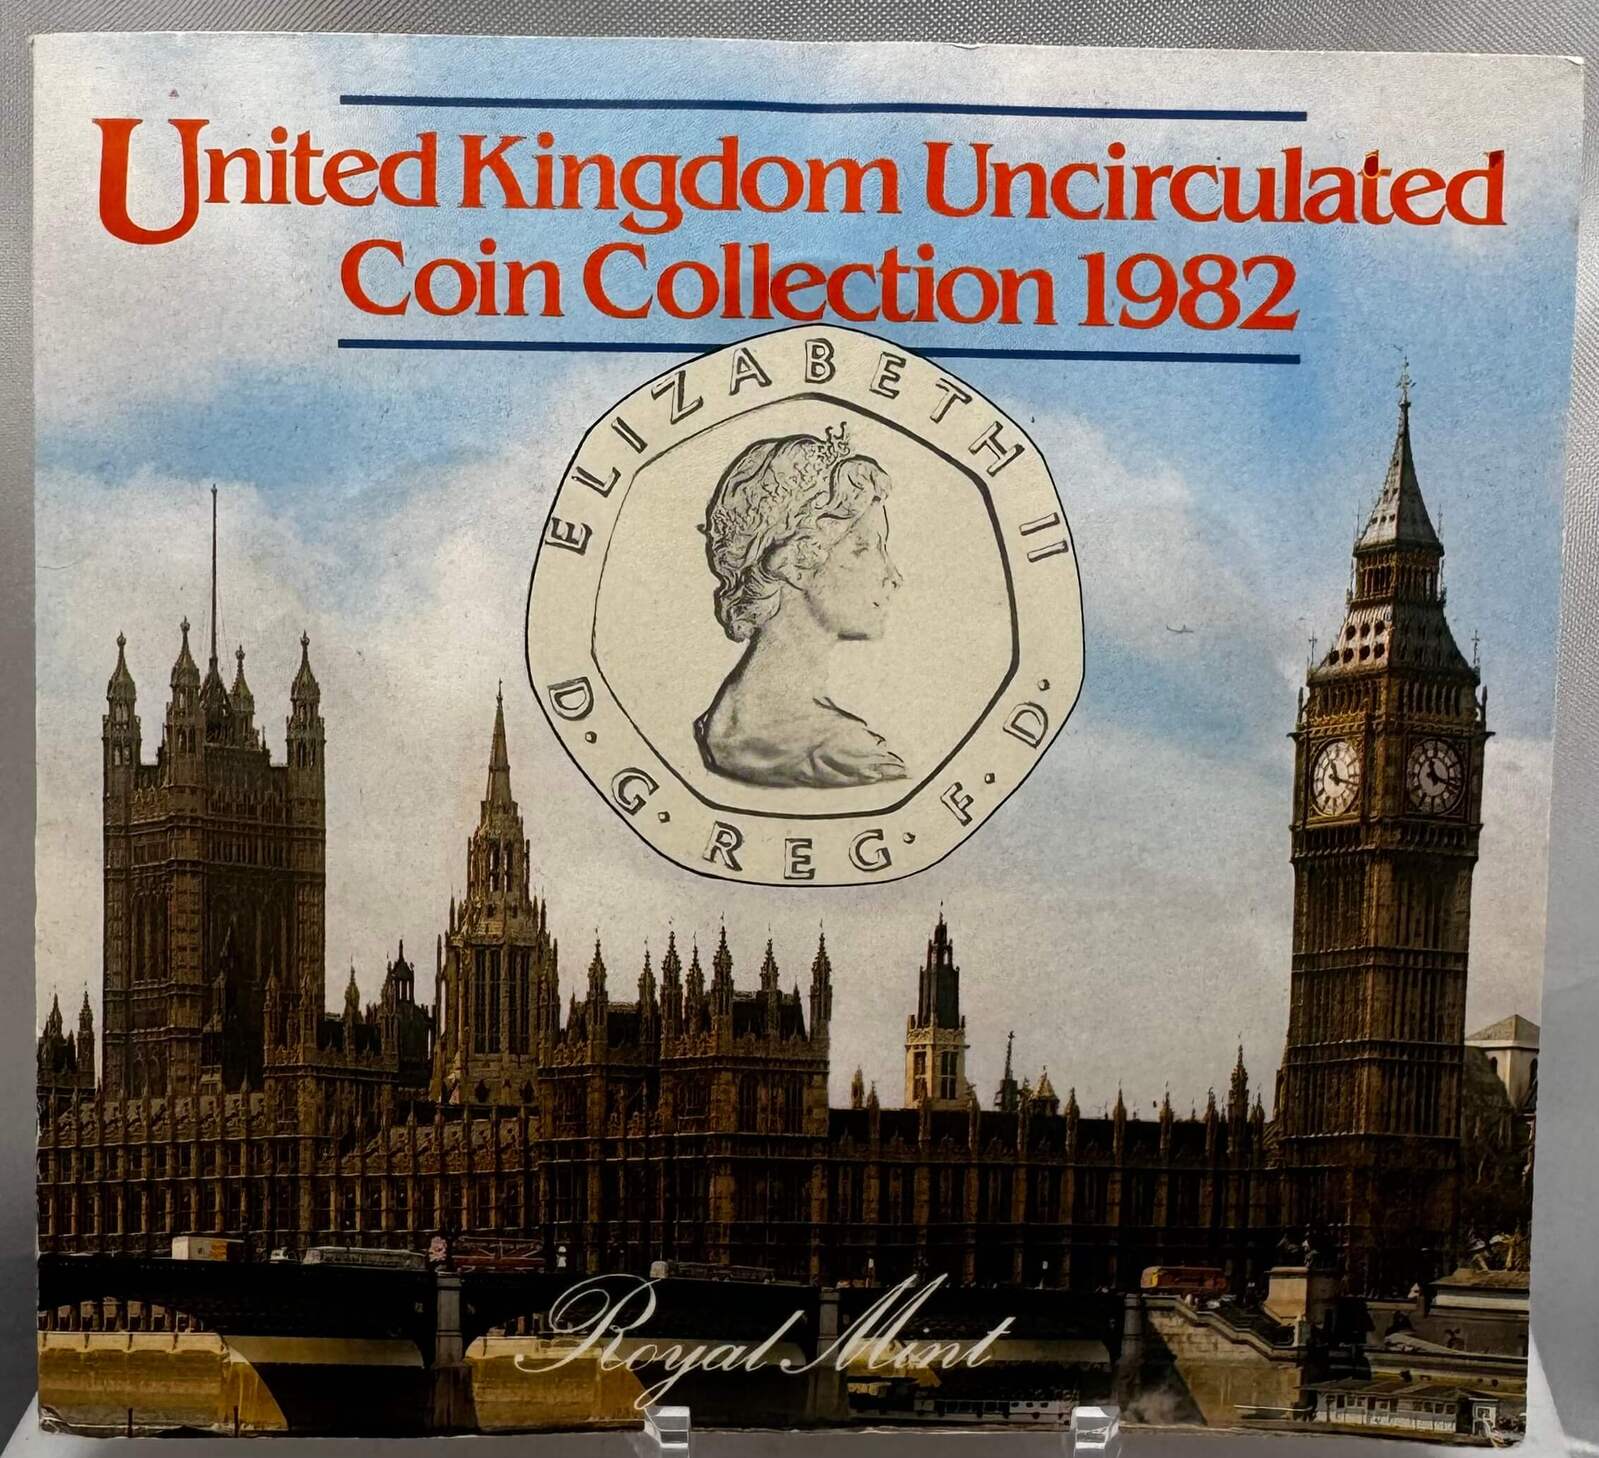 United Kingdom 1982 Uncirculated 7 Coin Collection product image